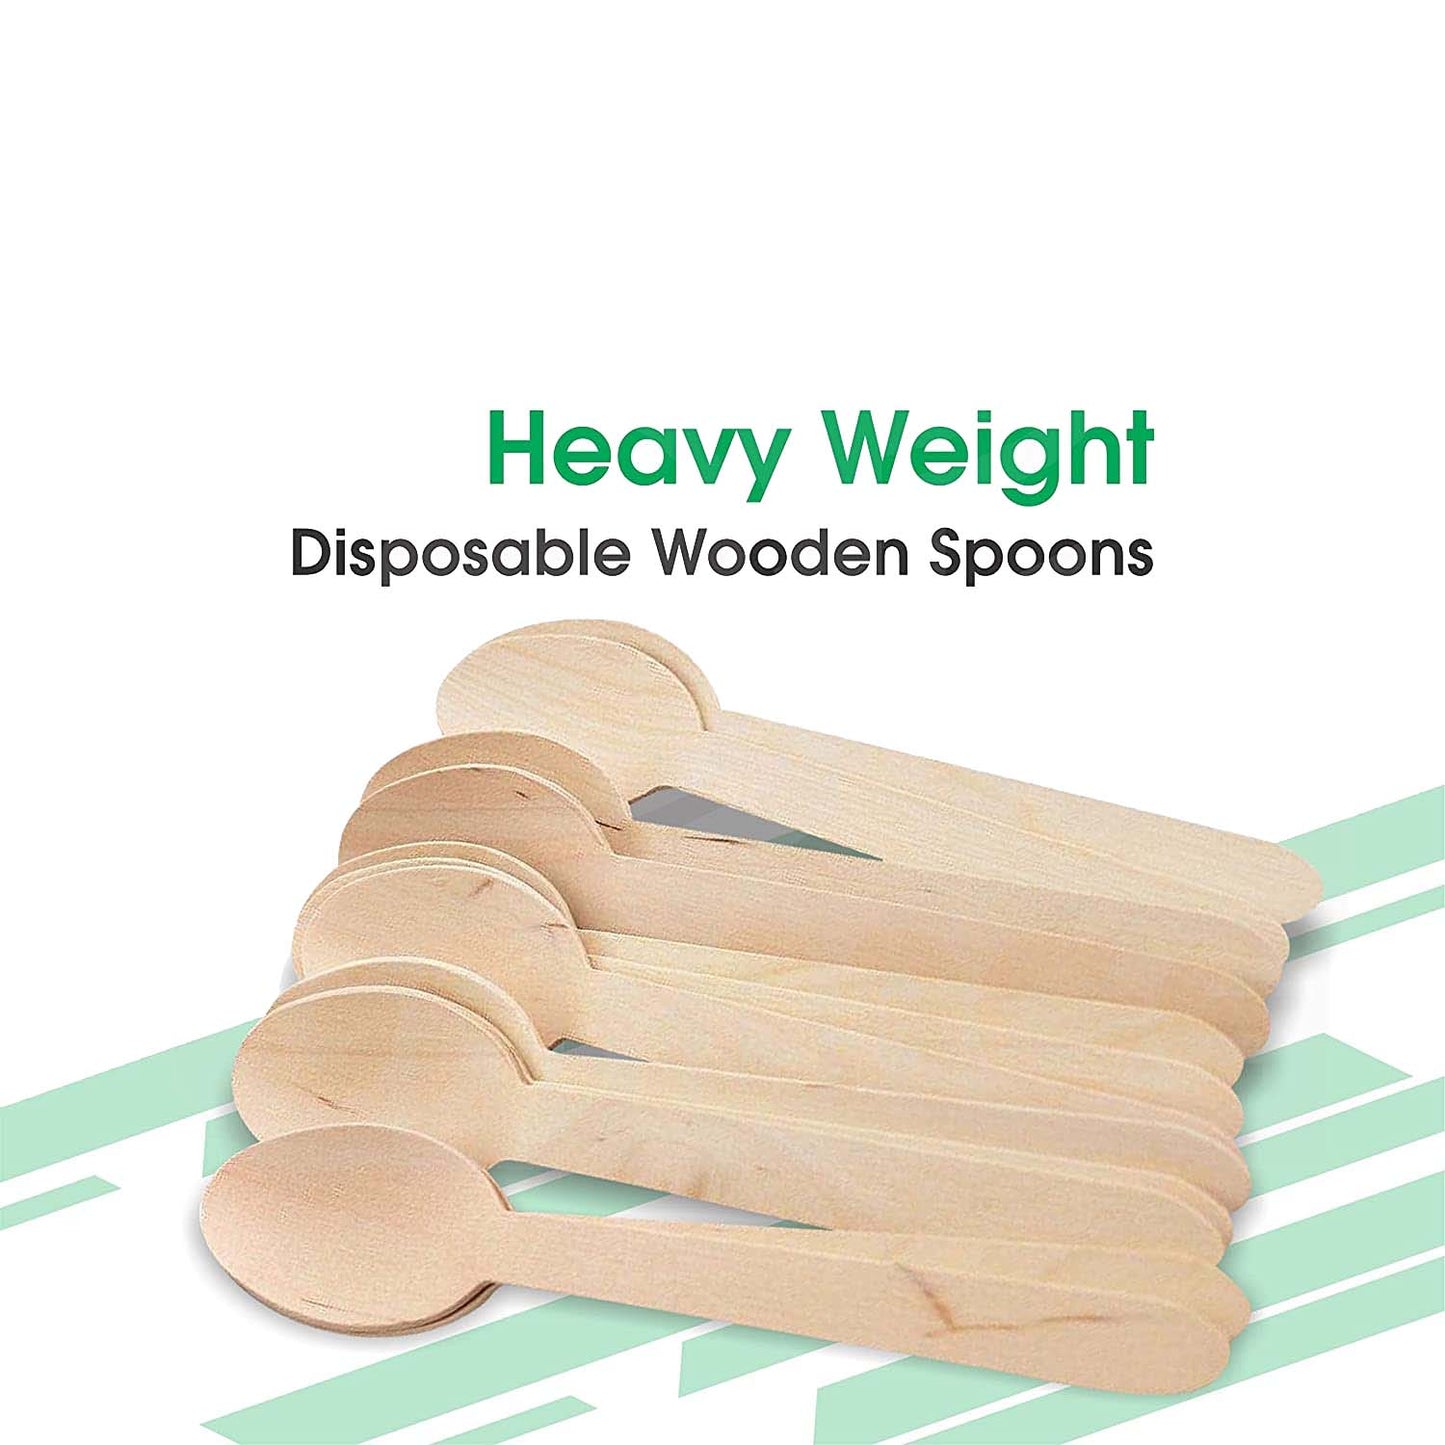 Disposable Wooden Spoons, 140 mm | Spoon for Home Use | Eco-Friendly | Disposable Spoon (Pack of 100)